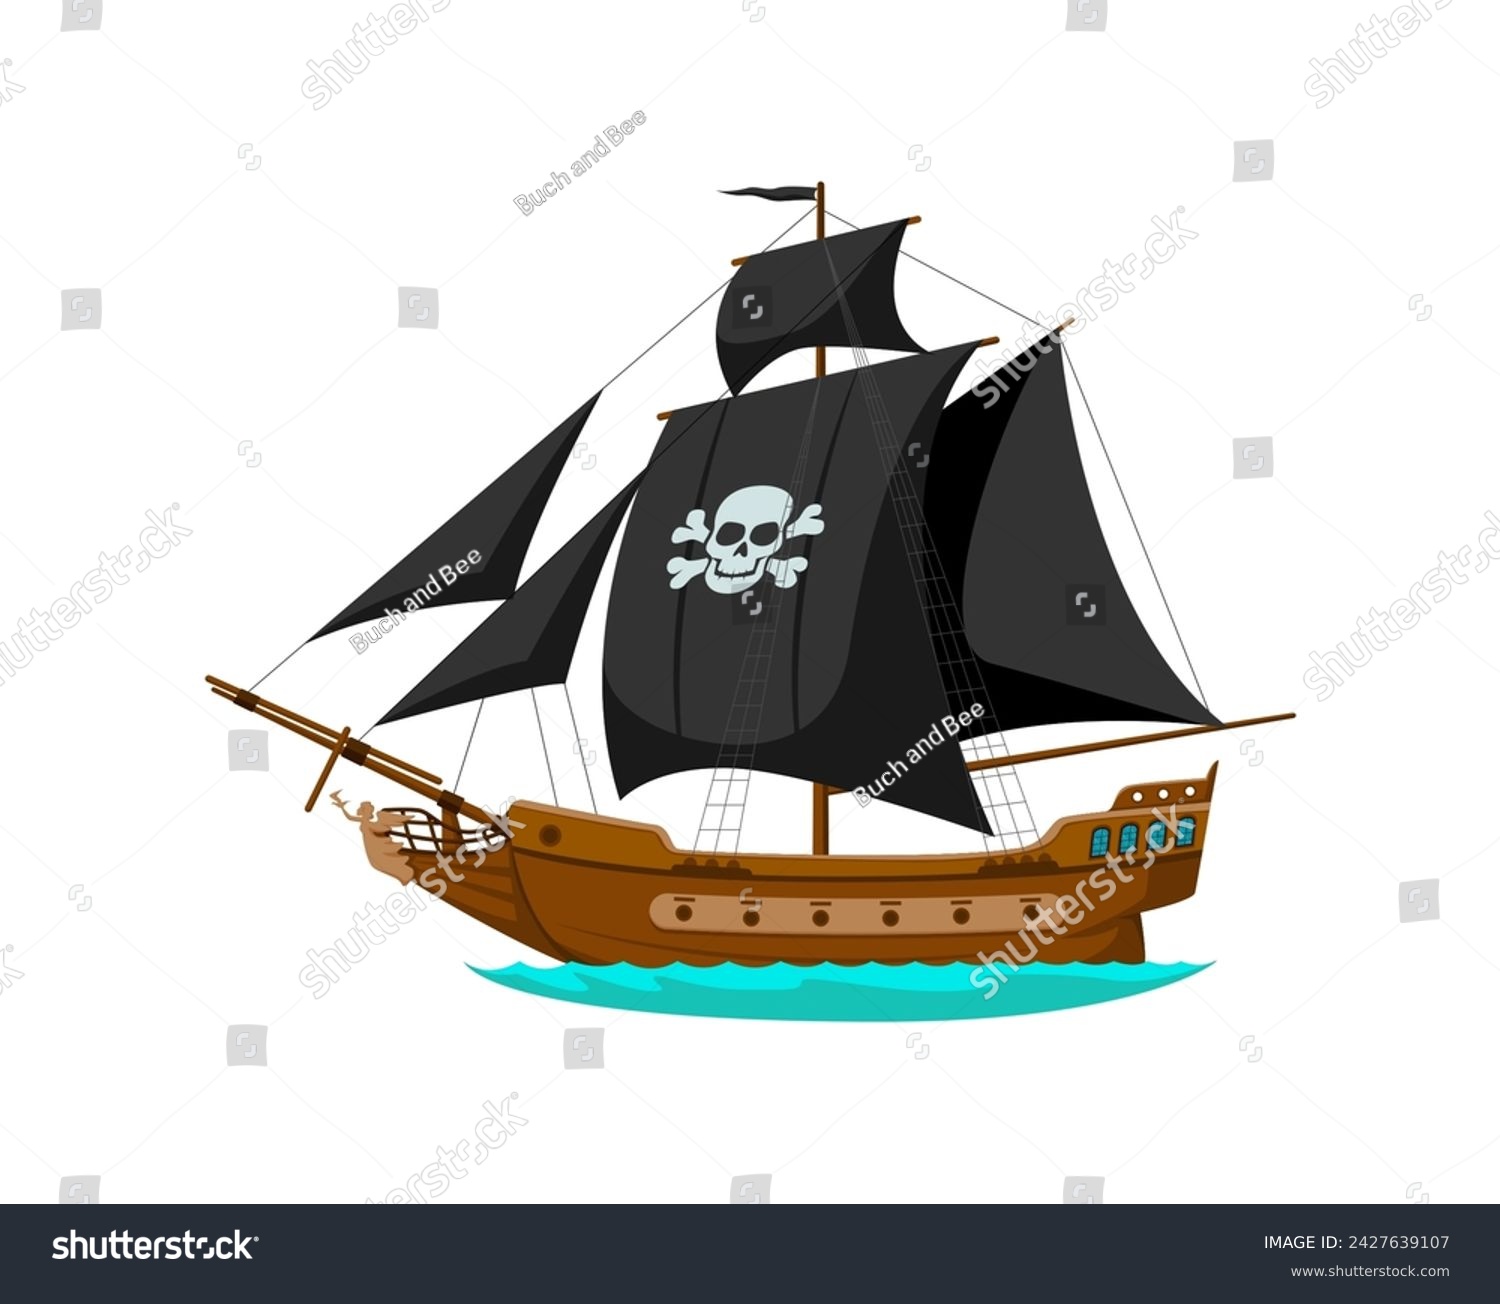 SVG of Cartoon sea pirate corsair sailing ship. Isolated vector old frigate with black sails, jolly roger skull, flag and wooden hull. Brigantine on ocean waves, ready for adventure. Buccaneer transportation svg